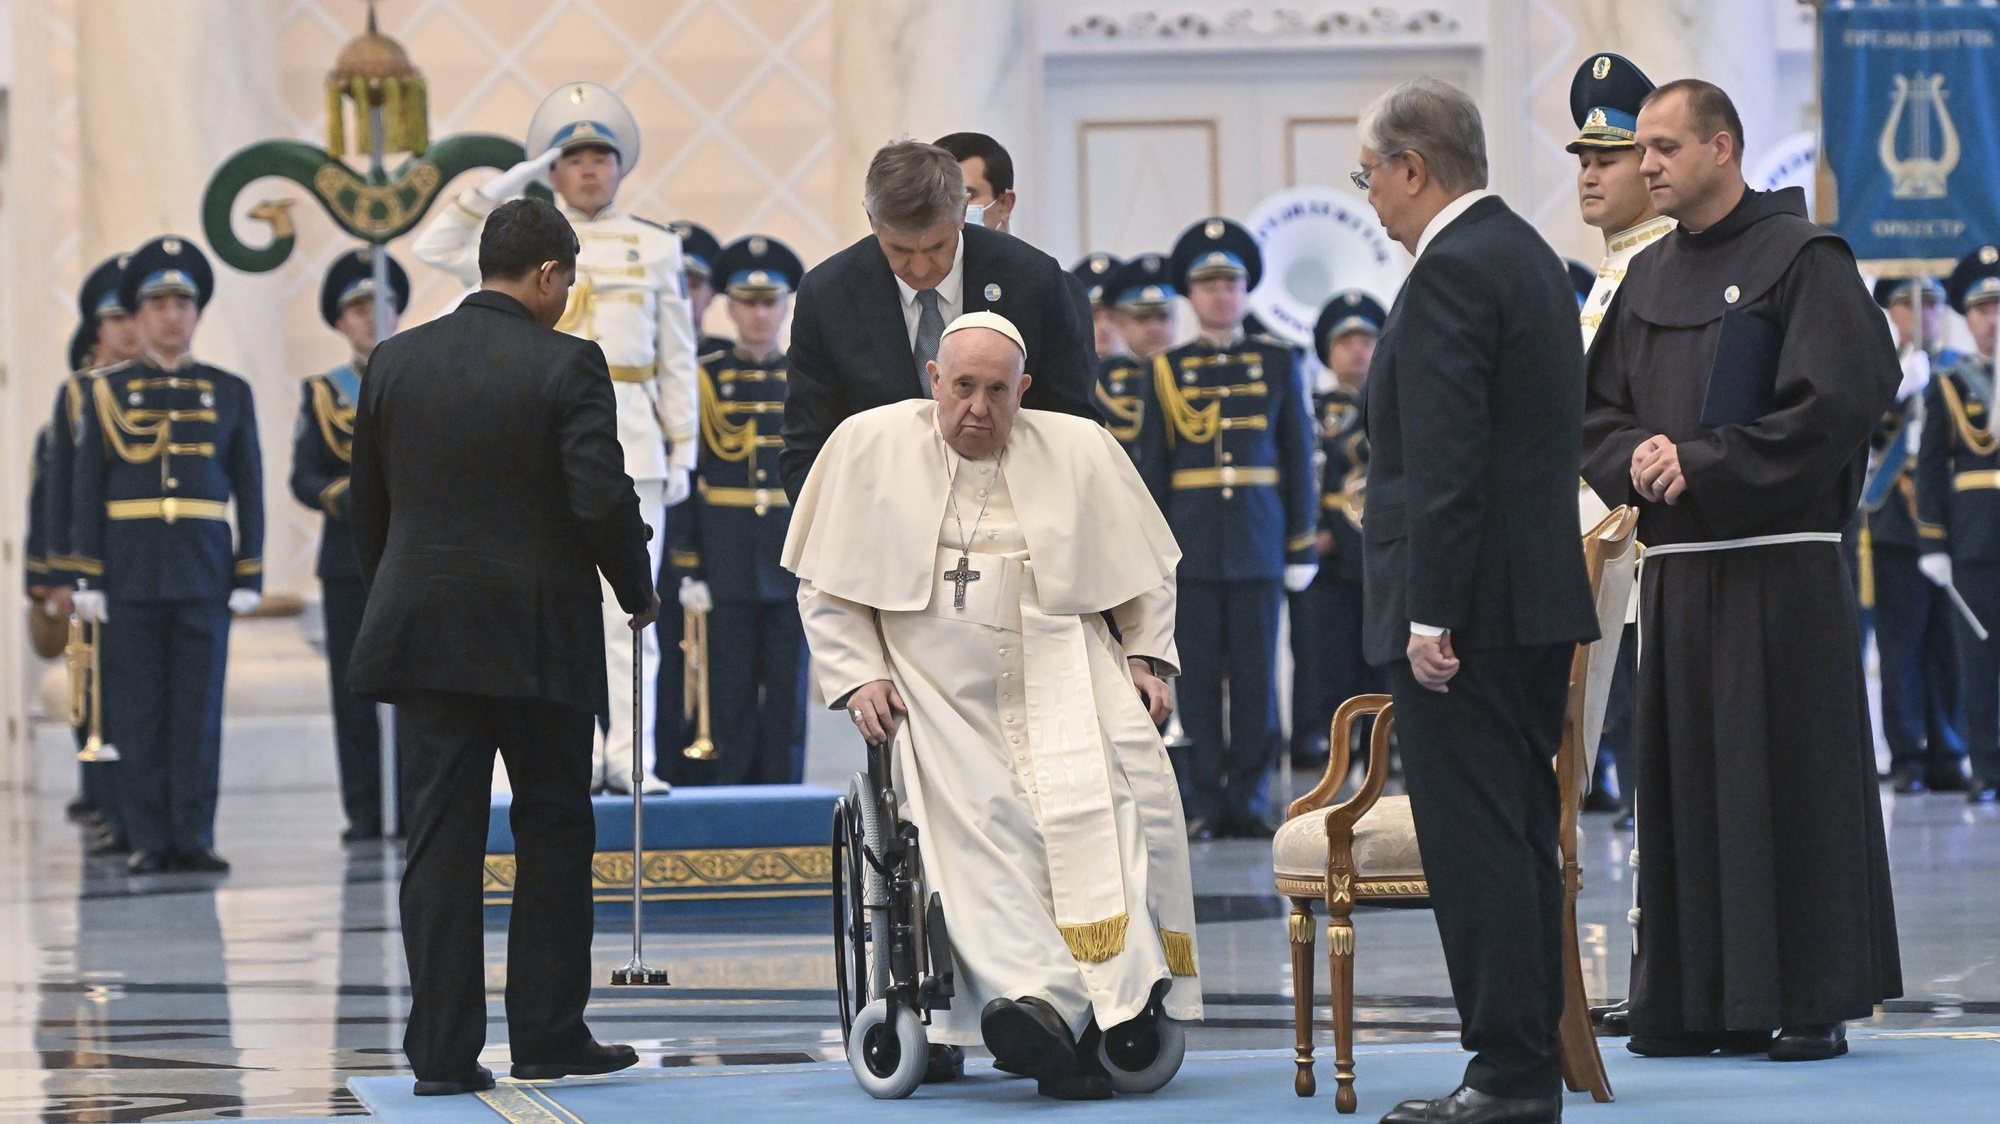 epa10181643 Pope Francis during the welcome ceremony with Kazakh President Kassym-Jomart Tokayev at the Presidential Palace in Nur-Sultan, Kazakhstan, 13 September 2022. The Pope is planned to meet with President Tokayev and hold a meeting with participants in the VII Congress of Leaders of World and Traditional Religions.  EPA/ALESSANDRO DI MEO